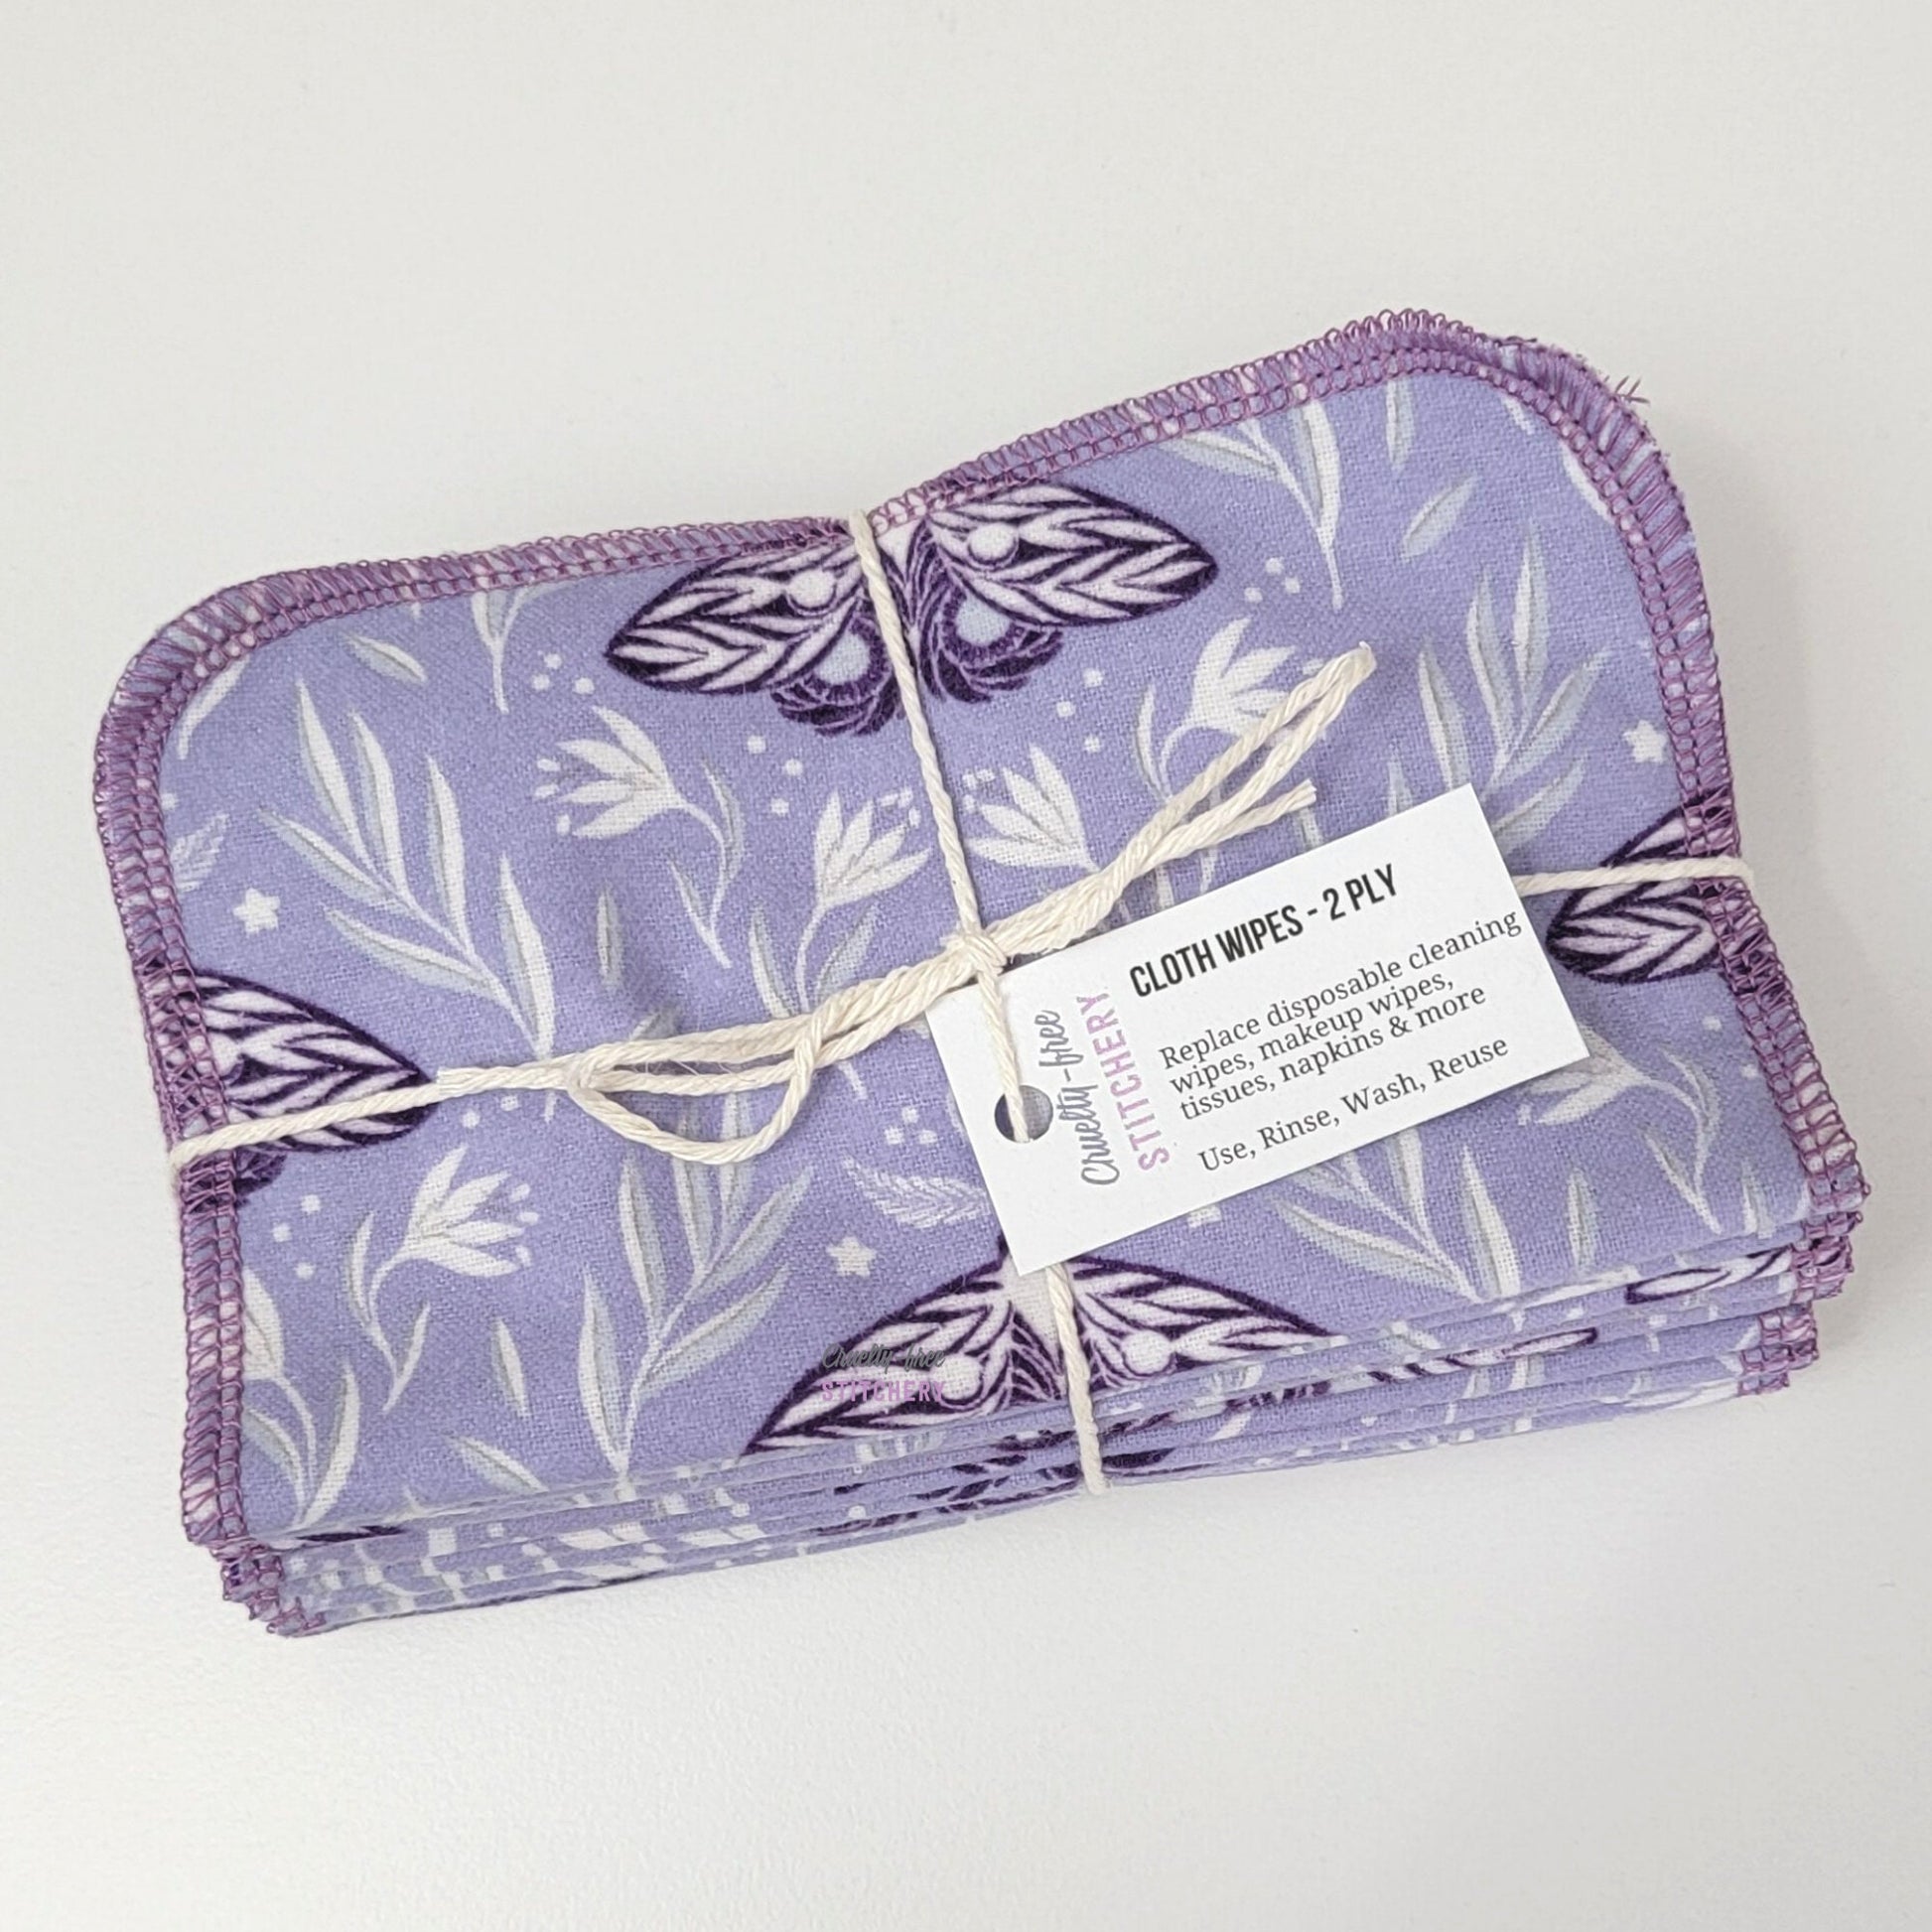 A folded and bundled pack of purple moths cloth wipes, tied with string and a small white tag.